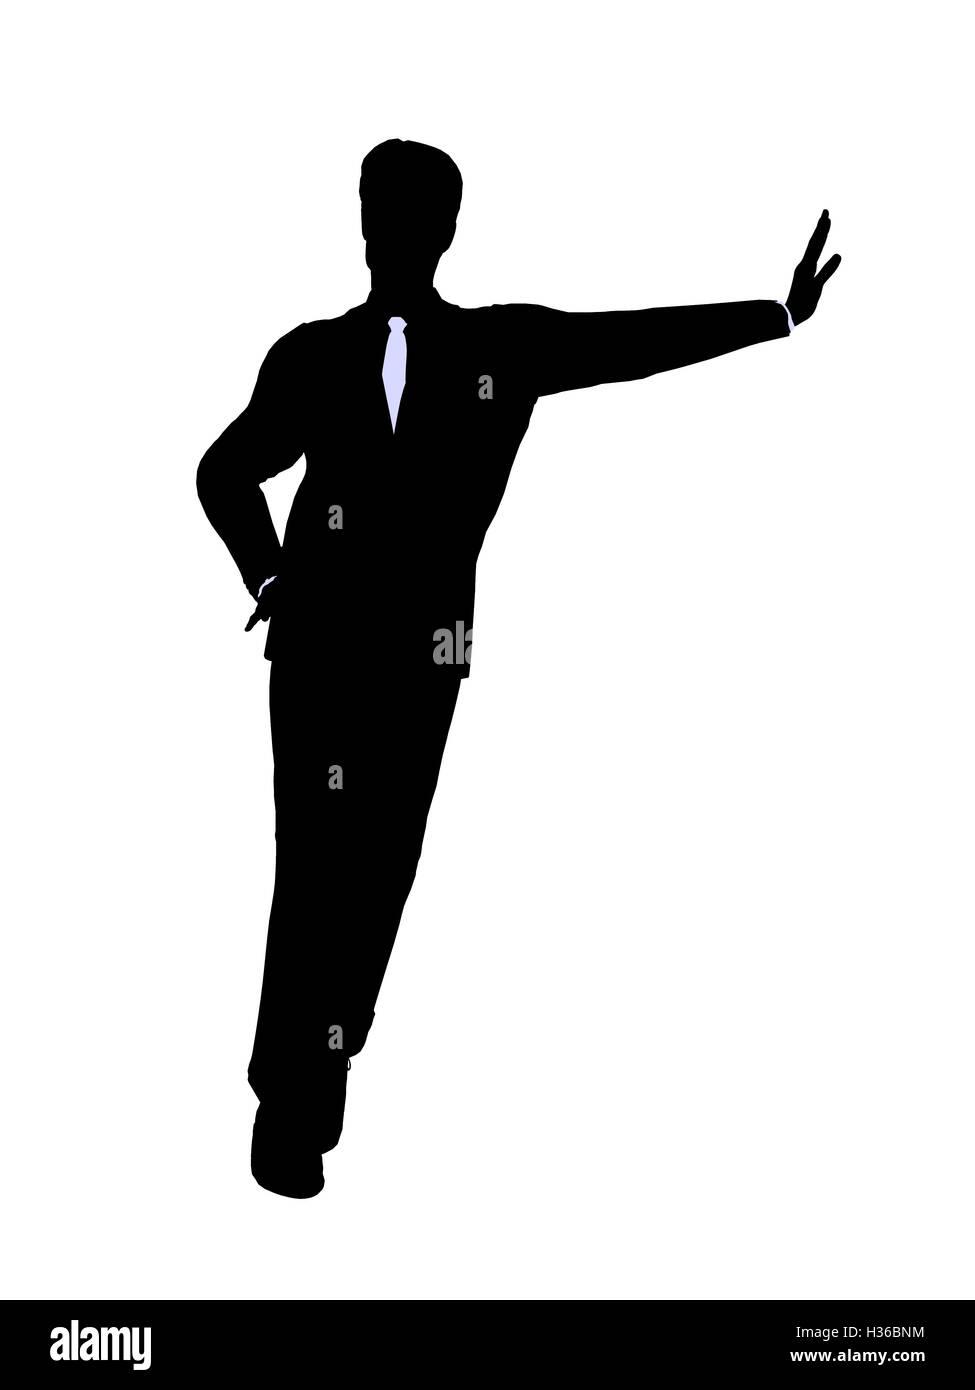 Business Office Illustration Silhouette Stock Photo